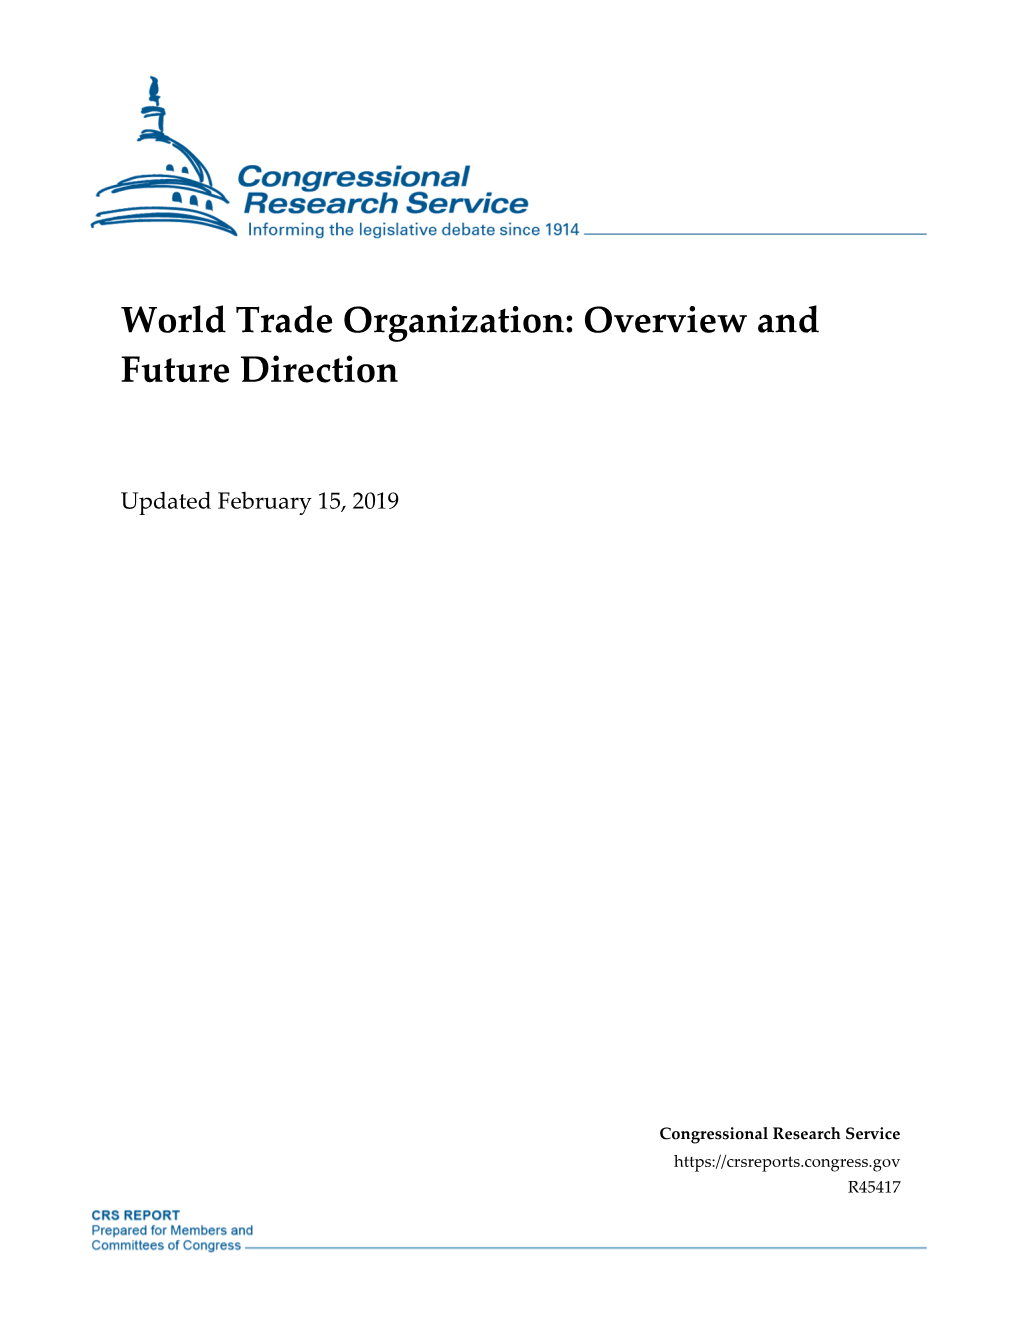 World Trade Organization: Overview and Future Direction